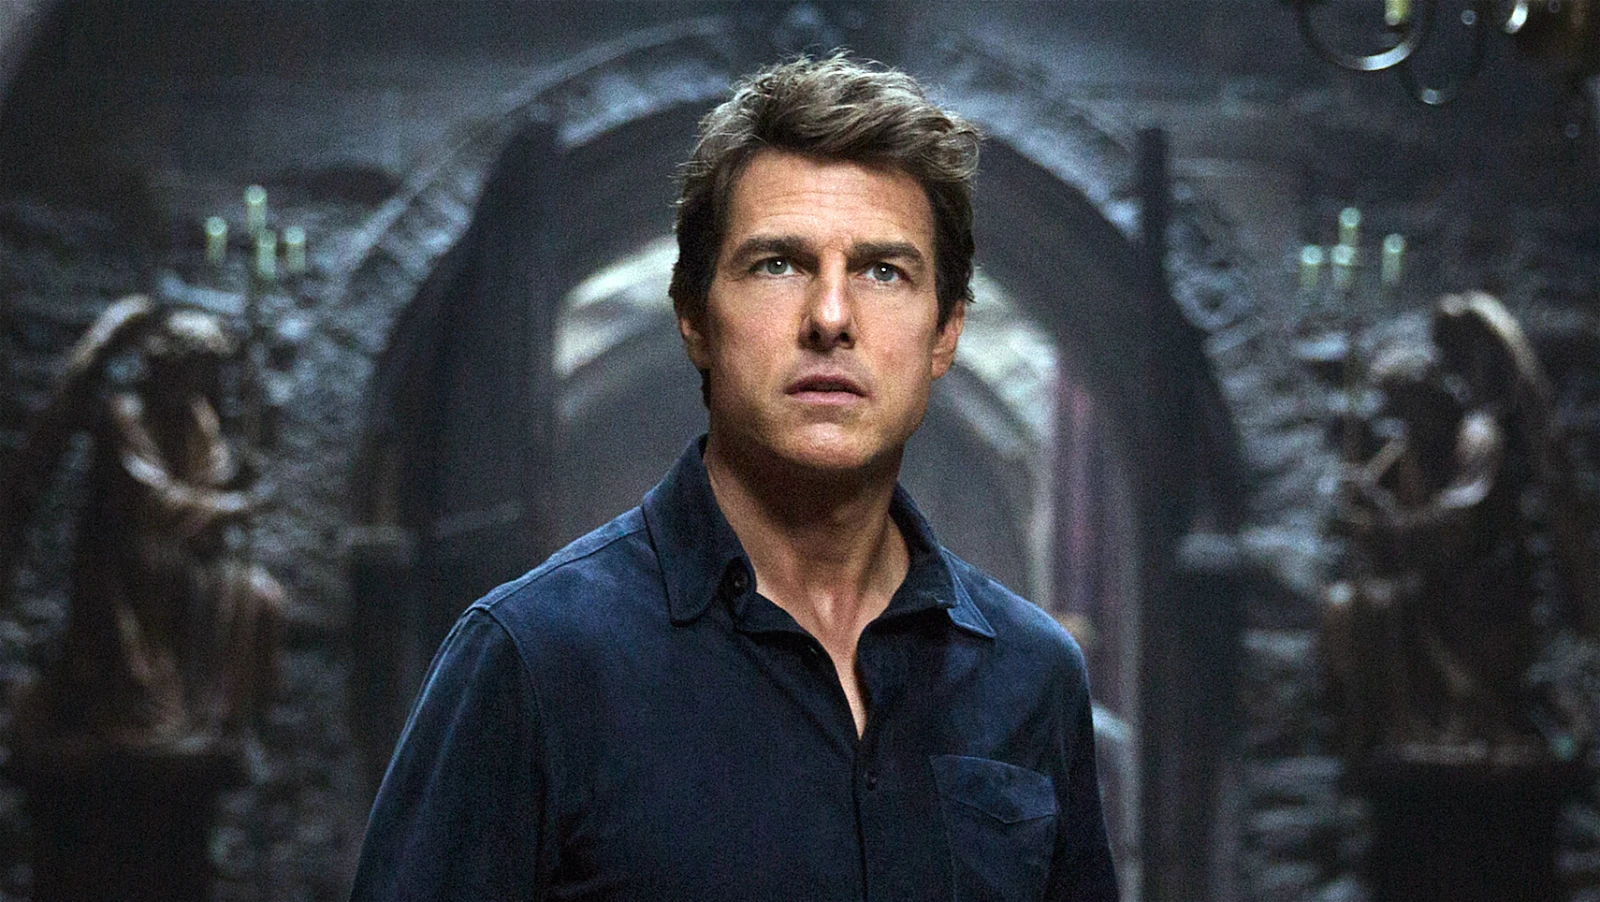 Tom Cruise in a pivotal scene from 2017's The Mummy reboot